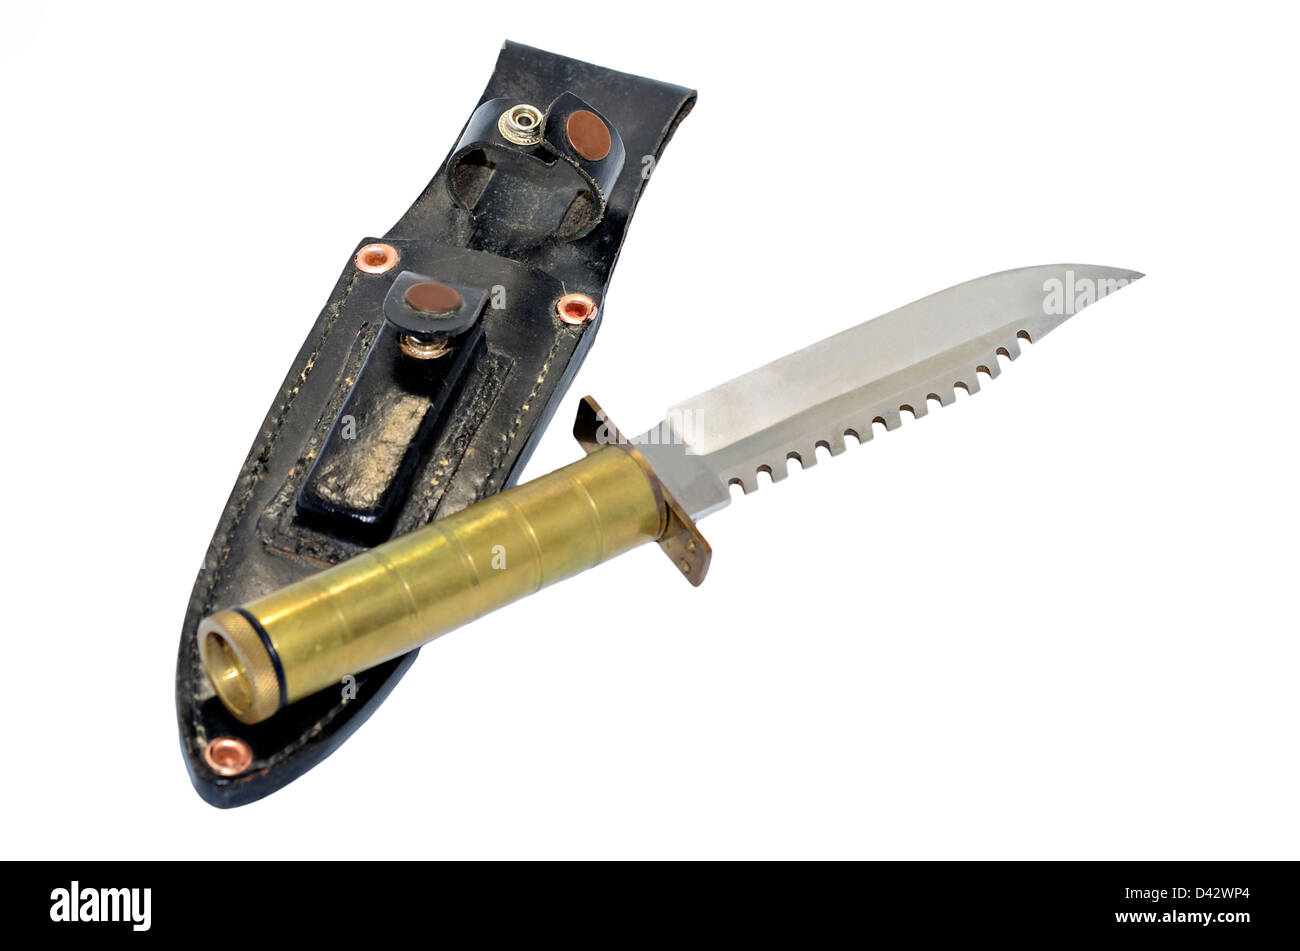 An old wilderness survival knife with brass handle along with a case and whet stone. Stock Photo